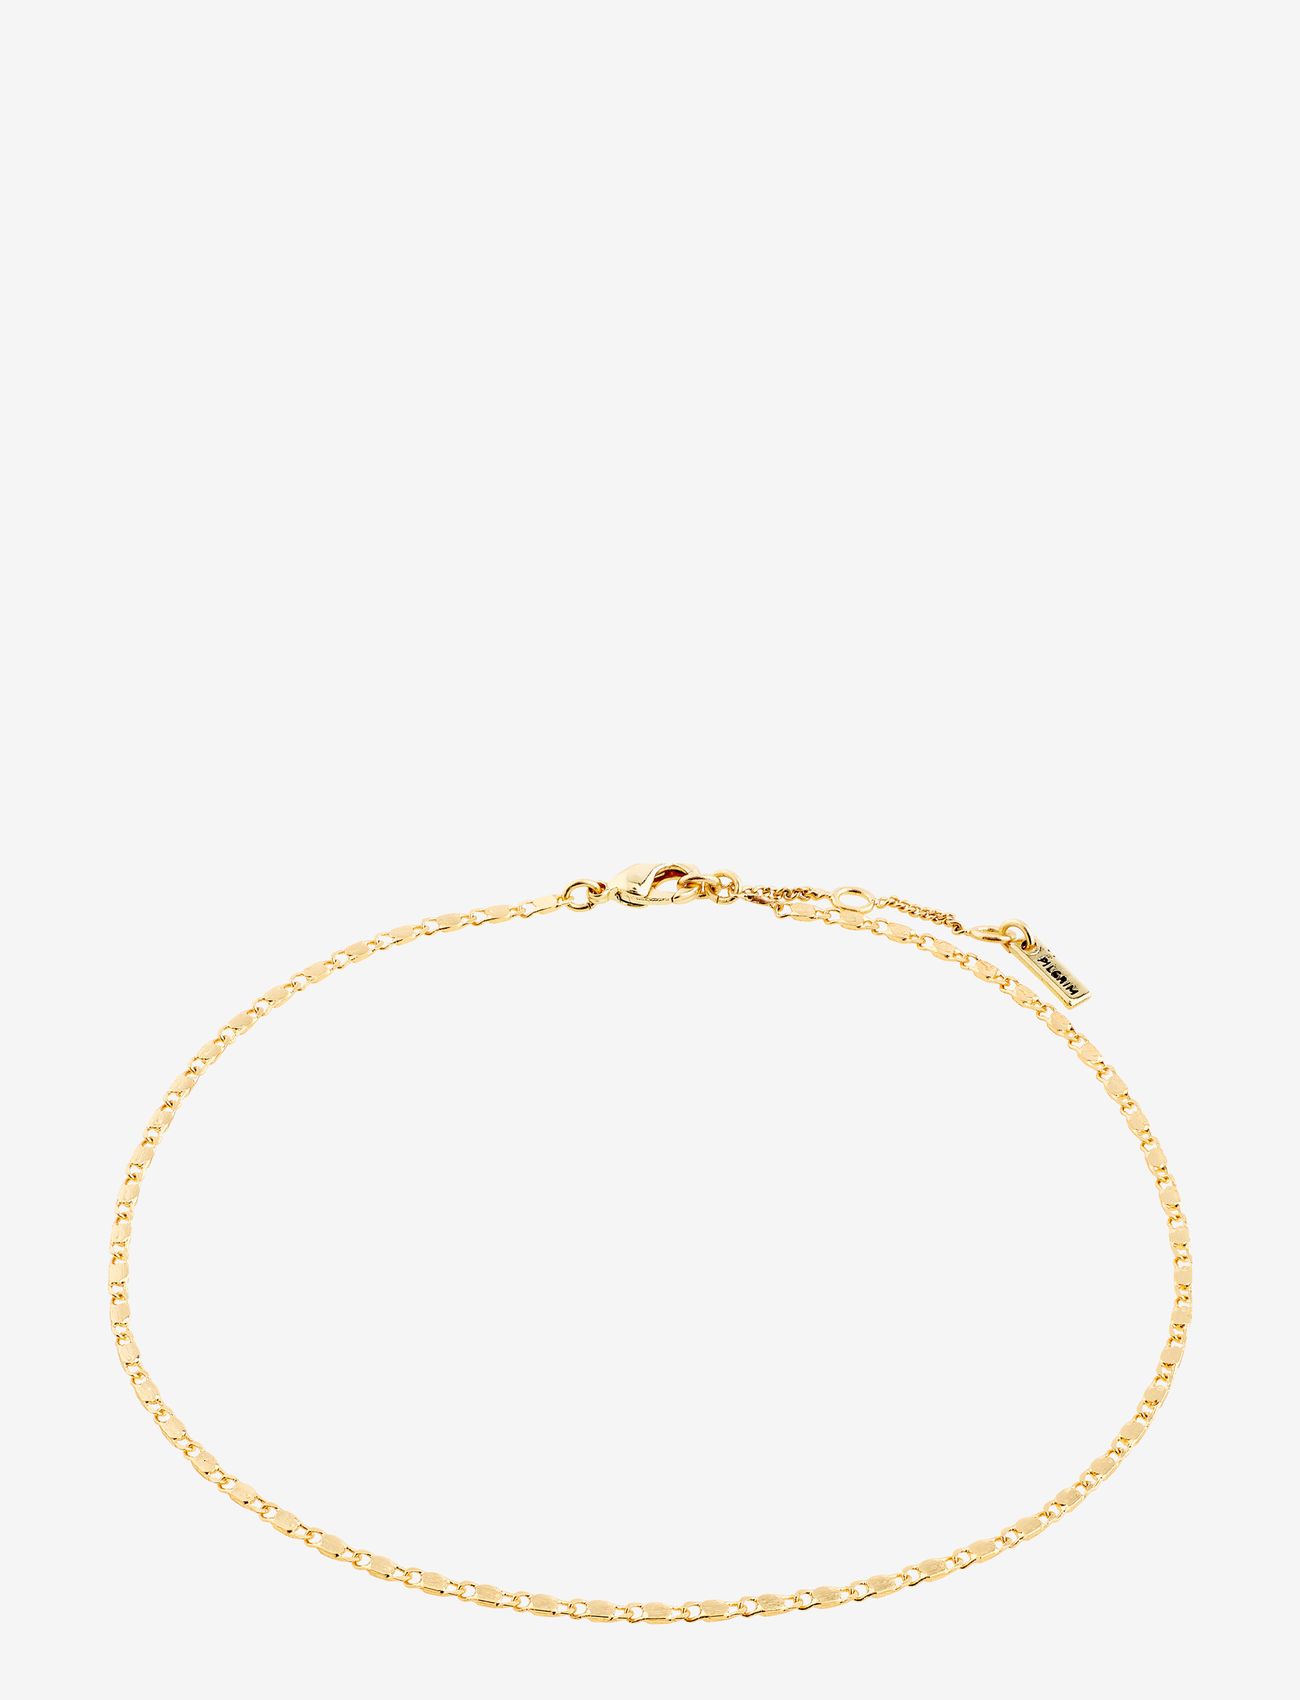 Pilgrim - Ankle chain Parisa Gold Plated - peoriided outlet-hindadega - gold plated - 0